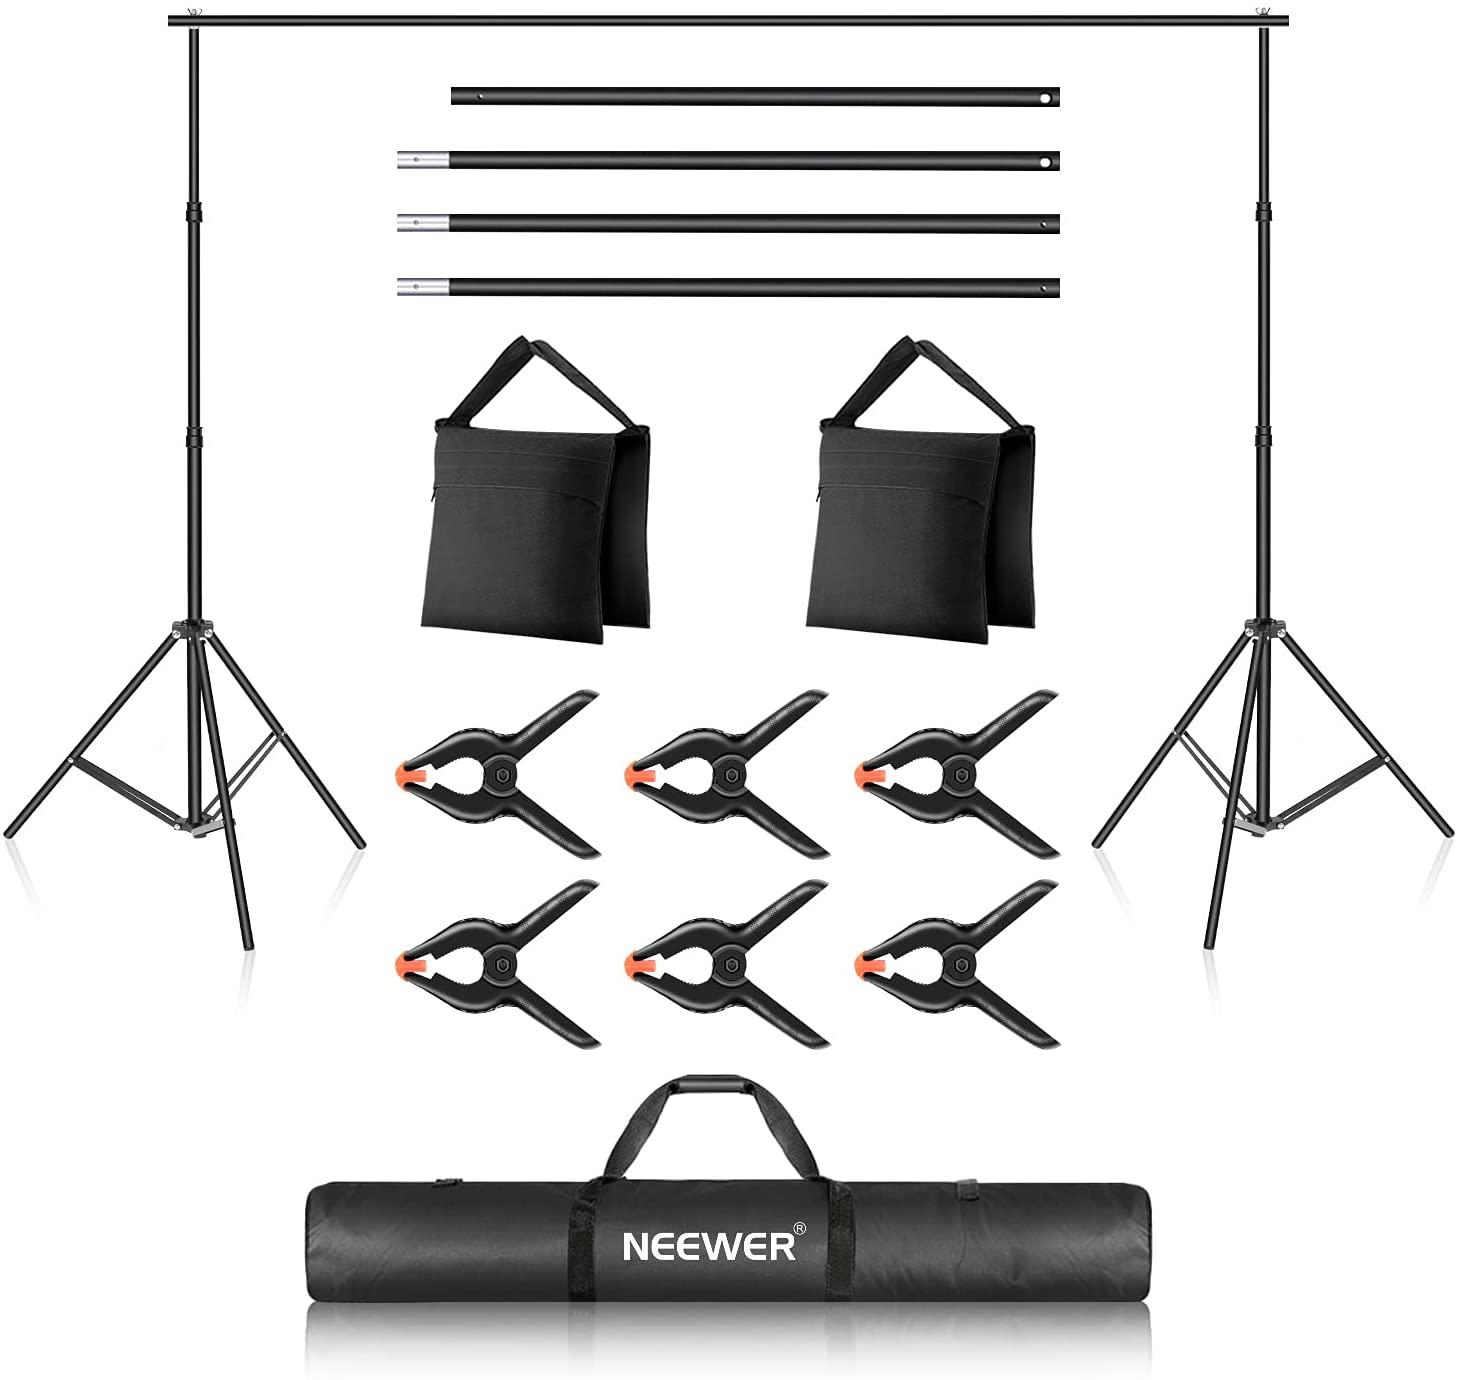 Neewer Photo Studio 10x7 Backdrop Support System for $29.99 Shipped